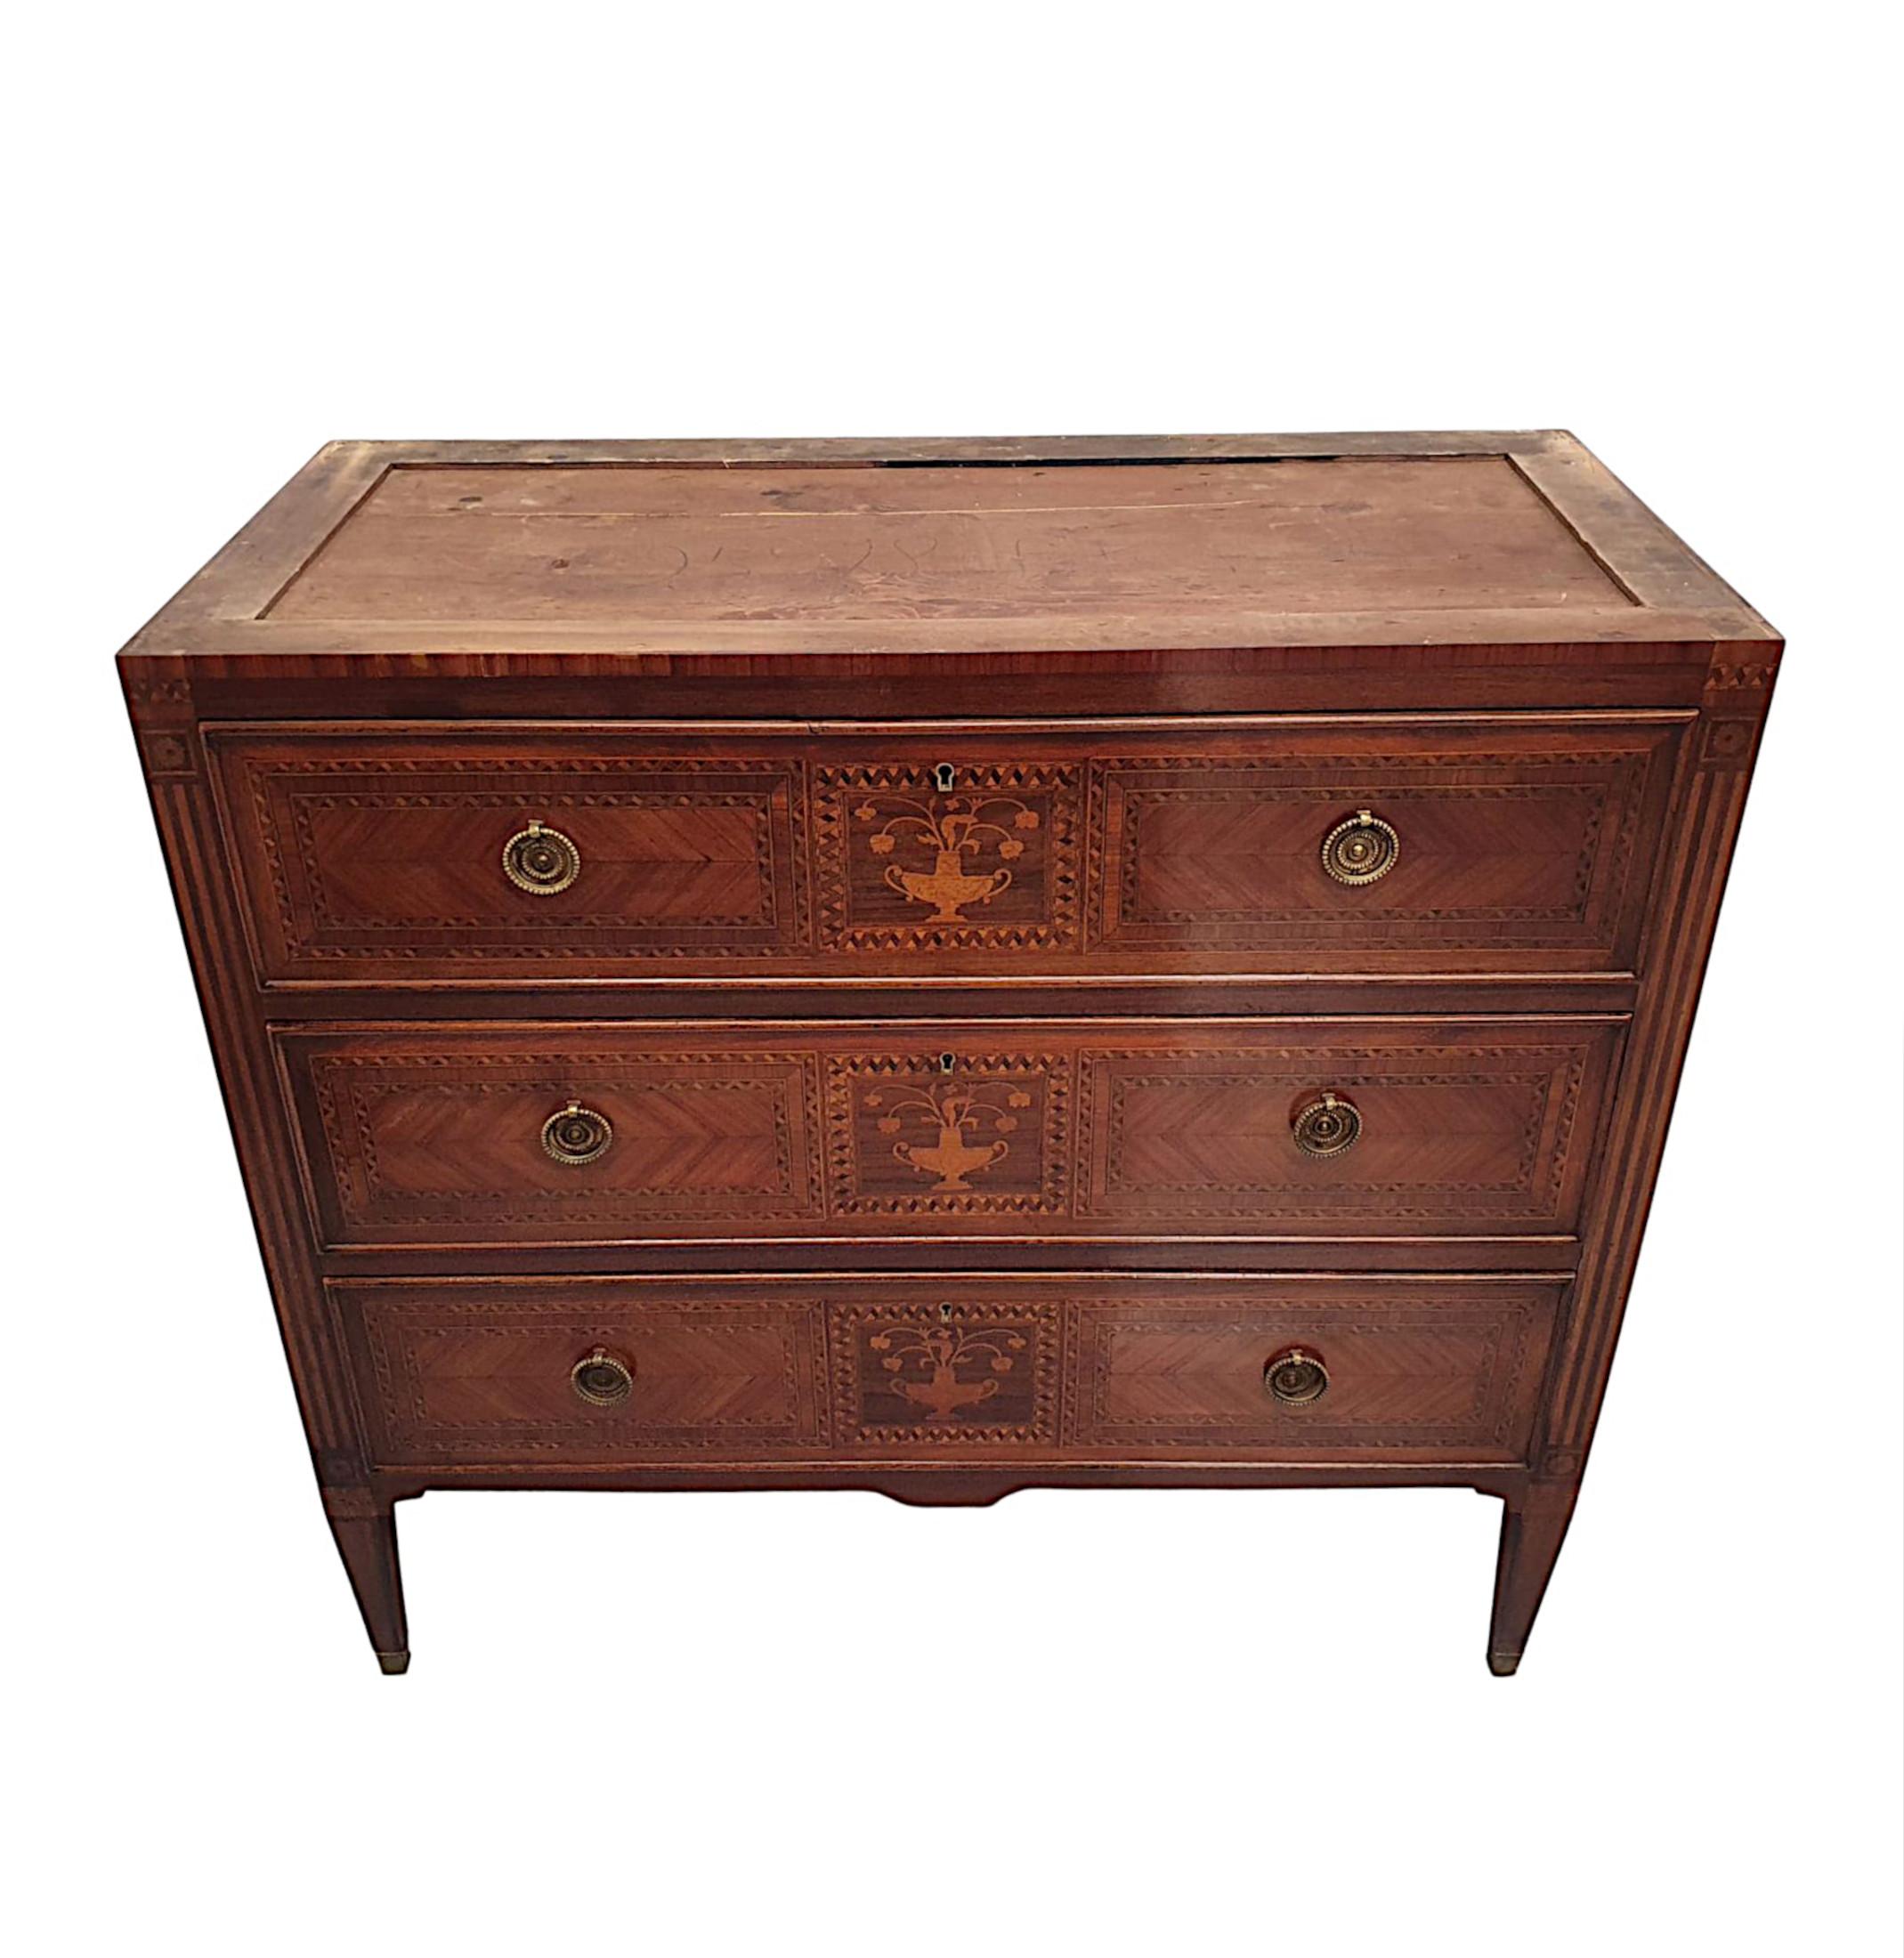 A Fine Early 20th Century Highly Inlaid Marble Top Chest of Drawers For Sale 1